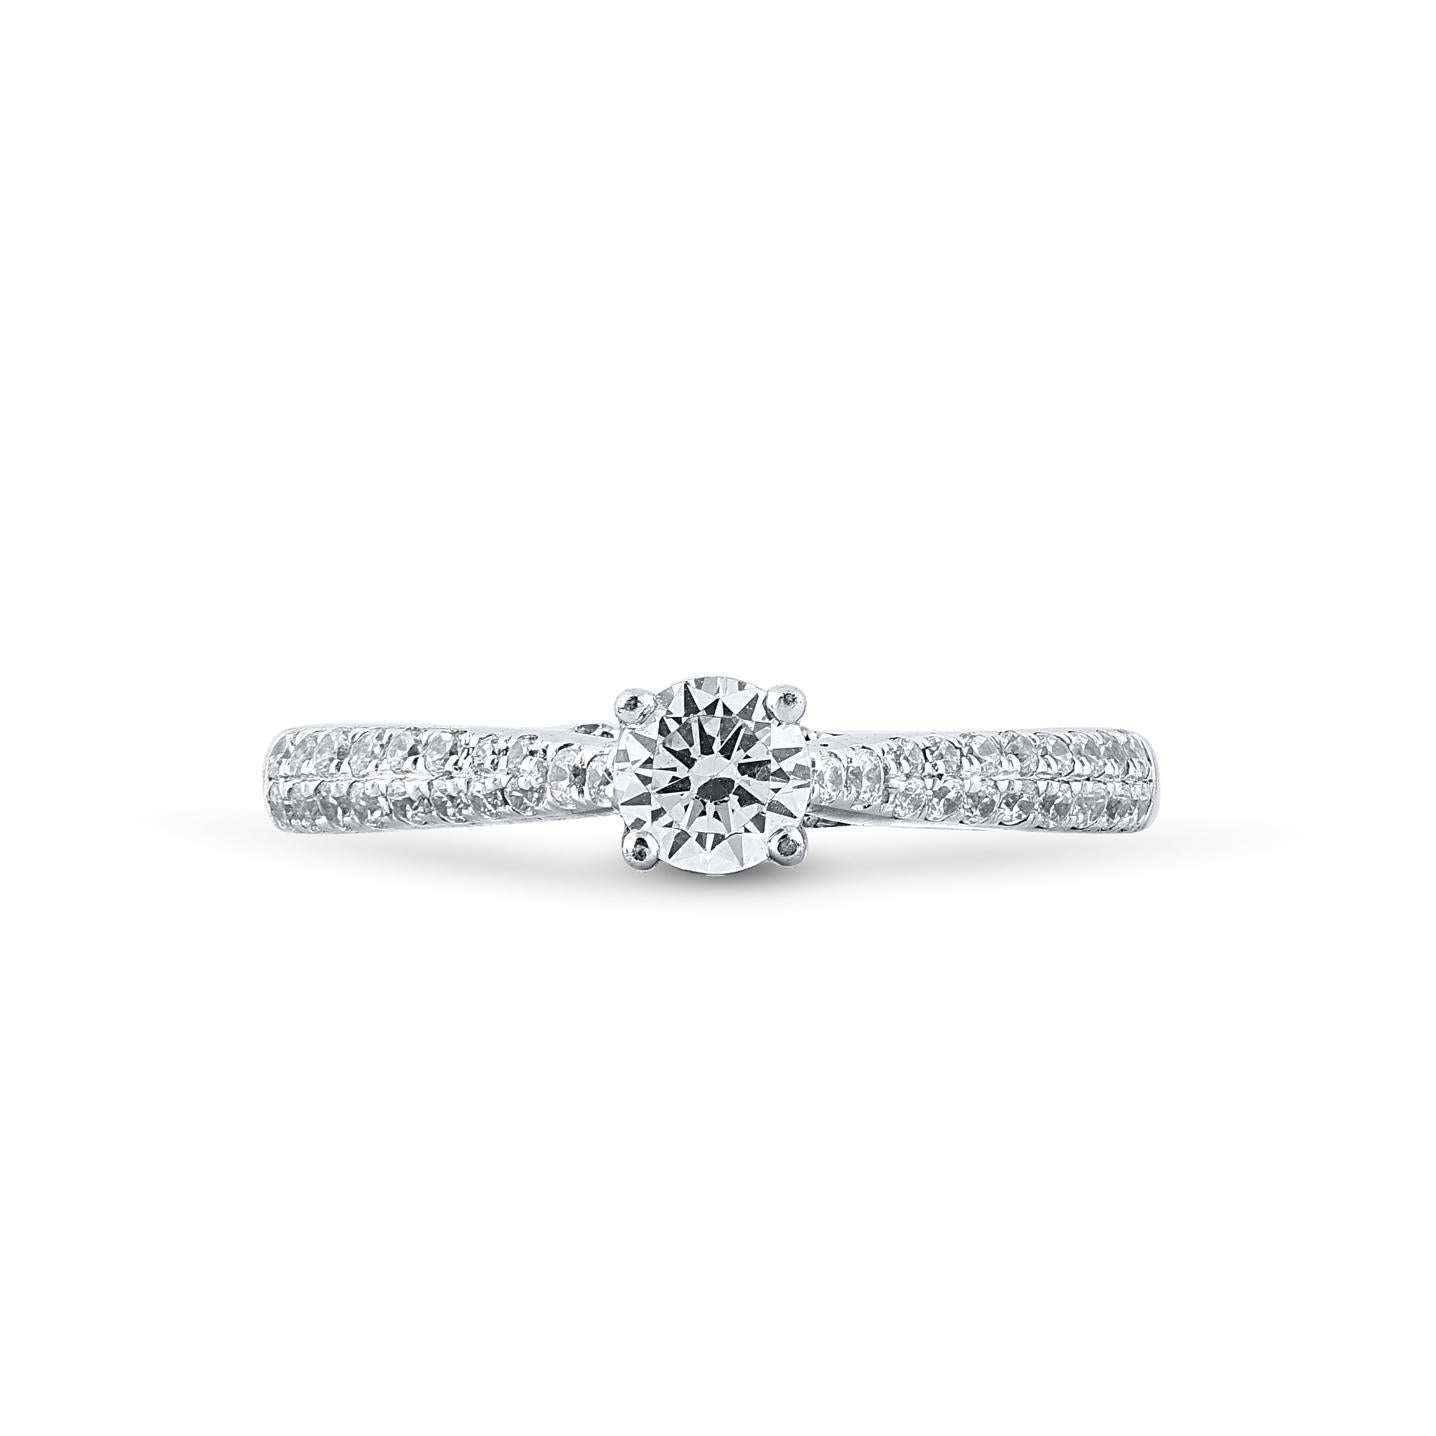 Contemporary TJD 0.66 Carat Round Diamond 18K White Gold Engagement Ring with Shoulder Stones For Sale